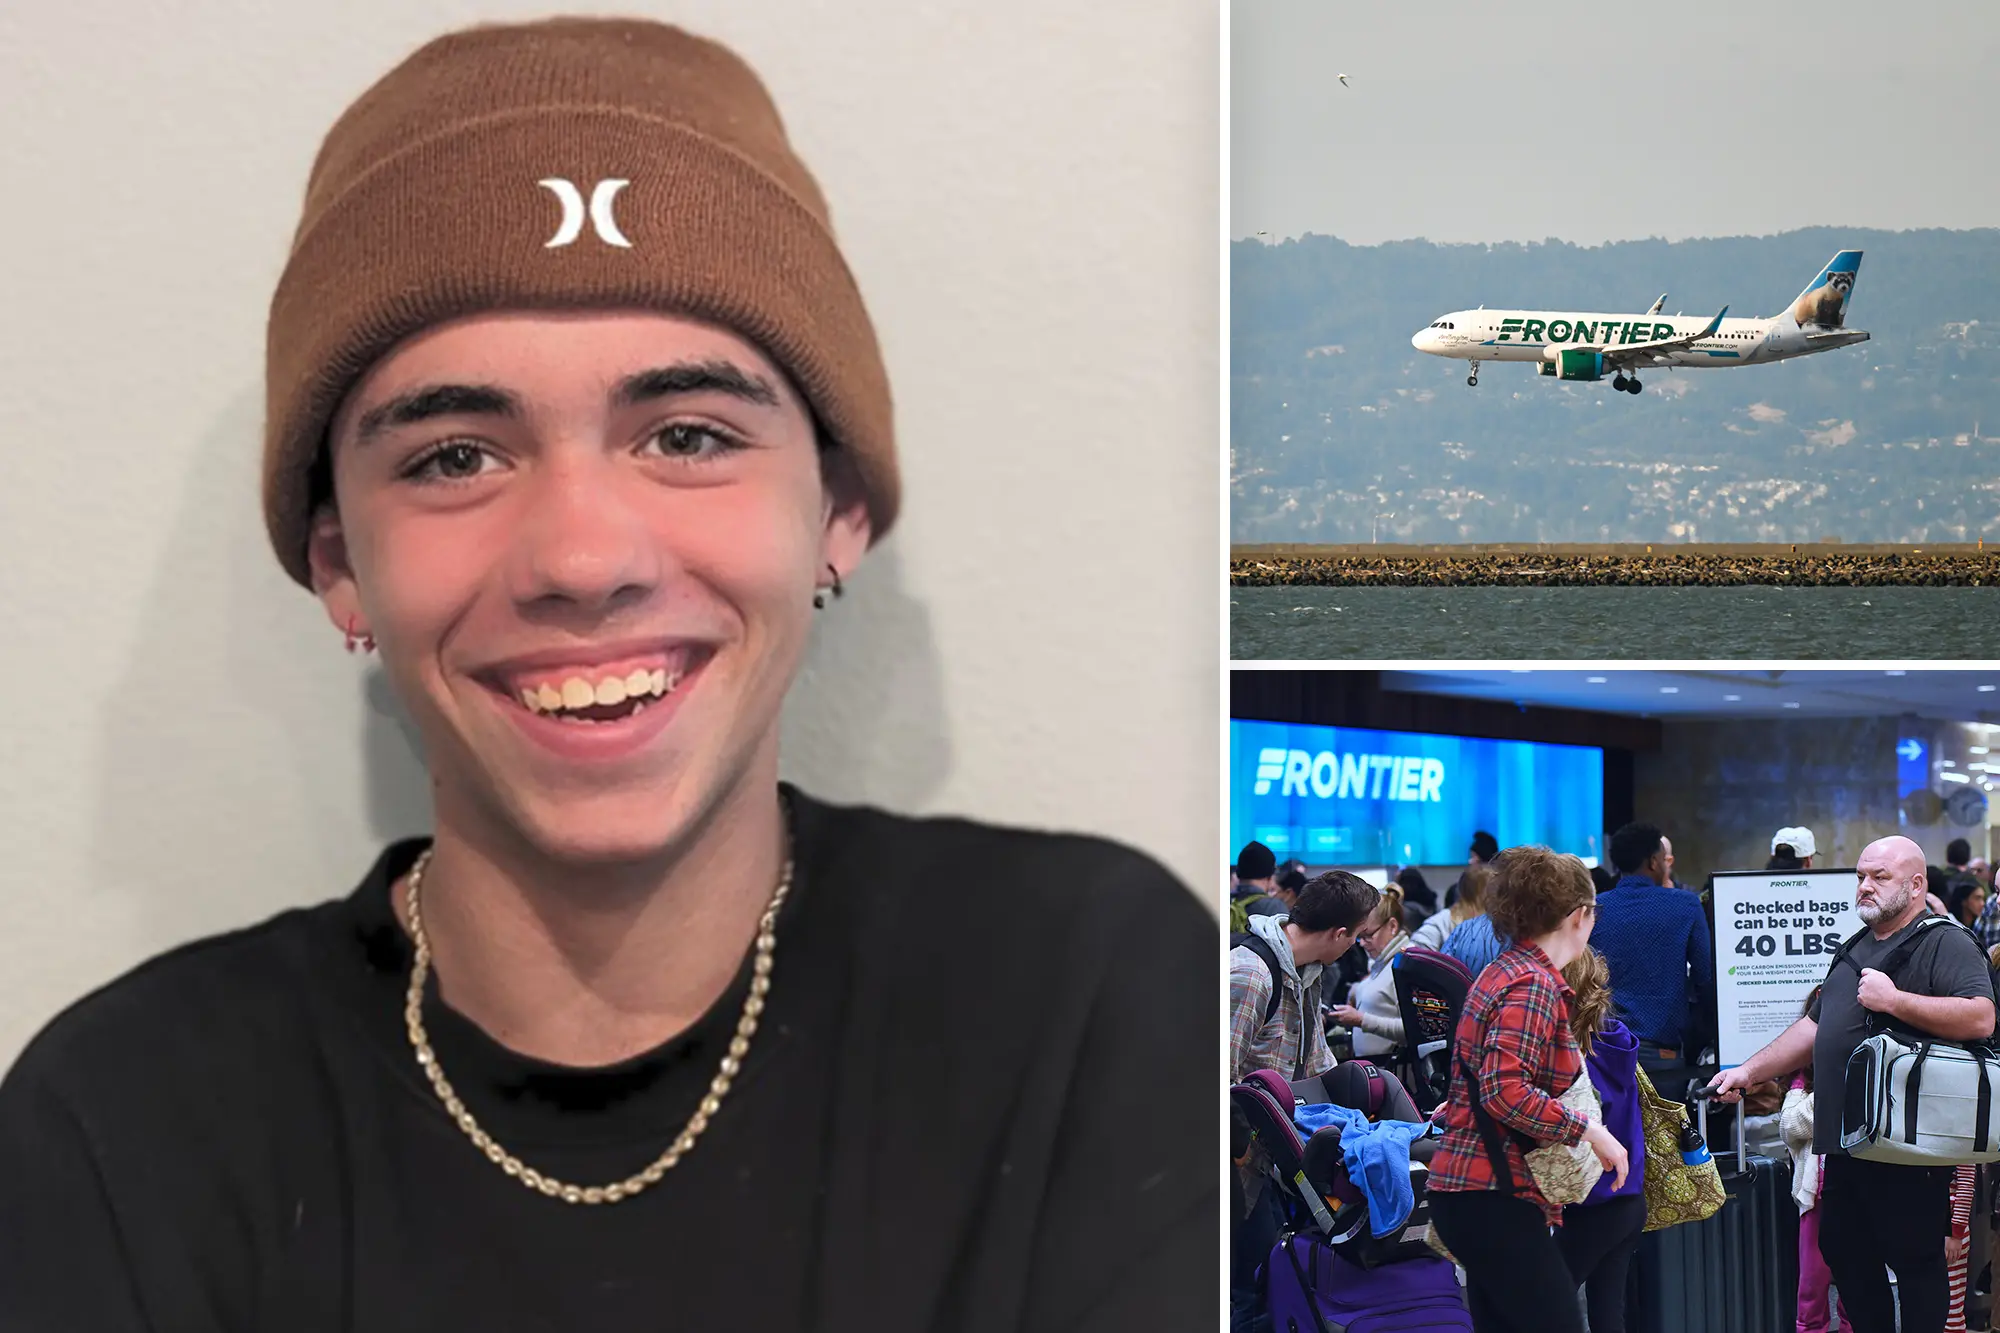 Florida teen on wrong flight ends up in Puerto Rico instead of Ohio